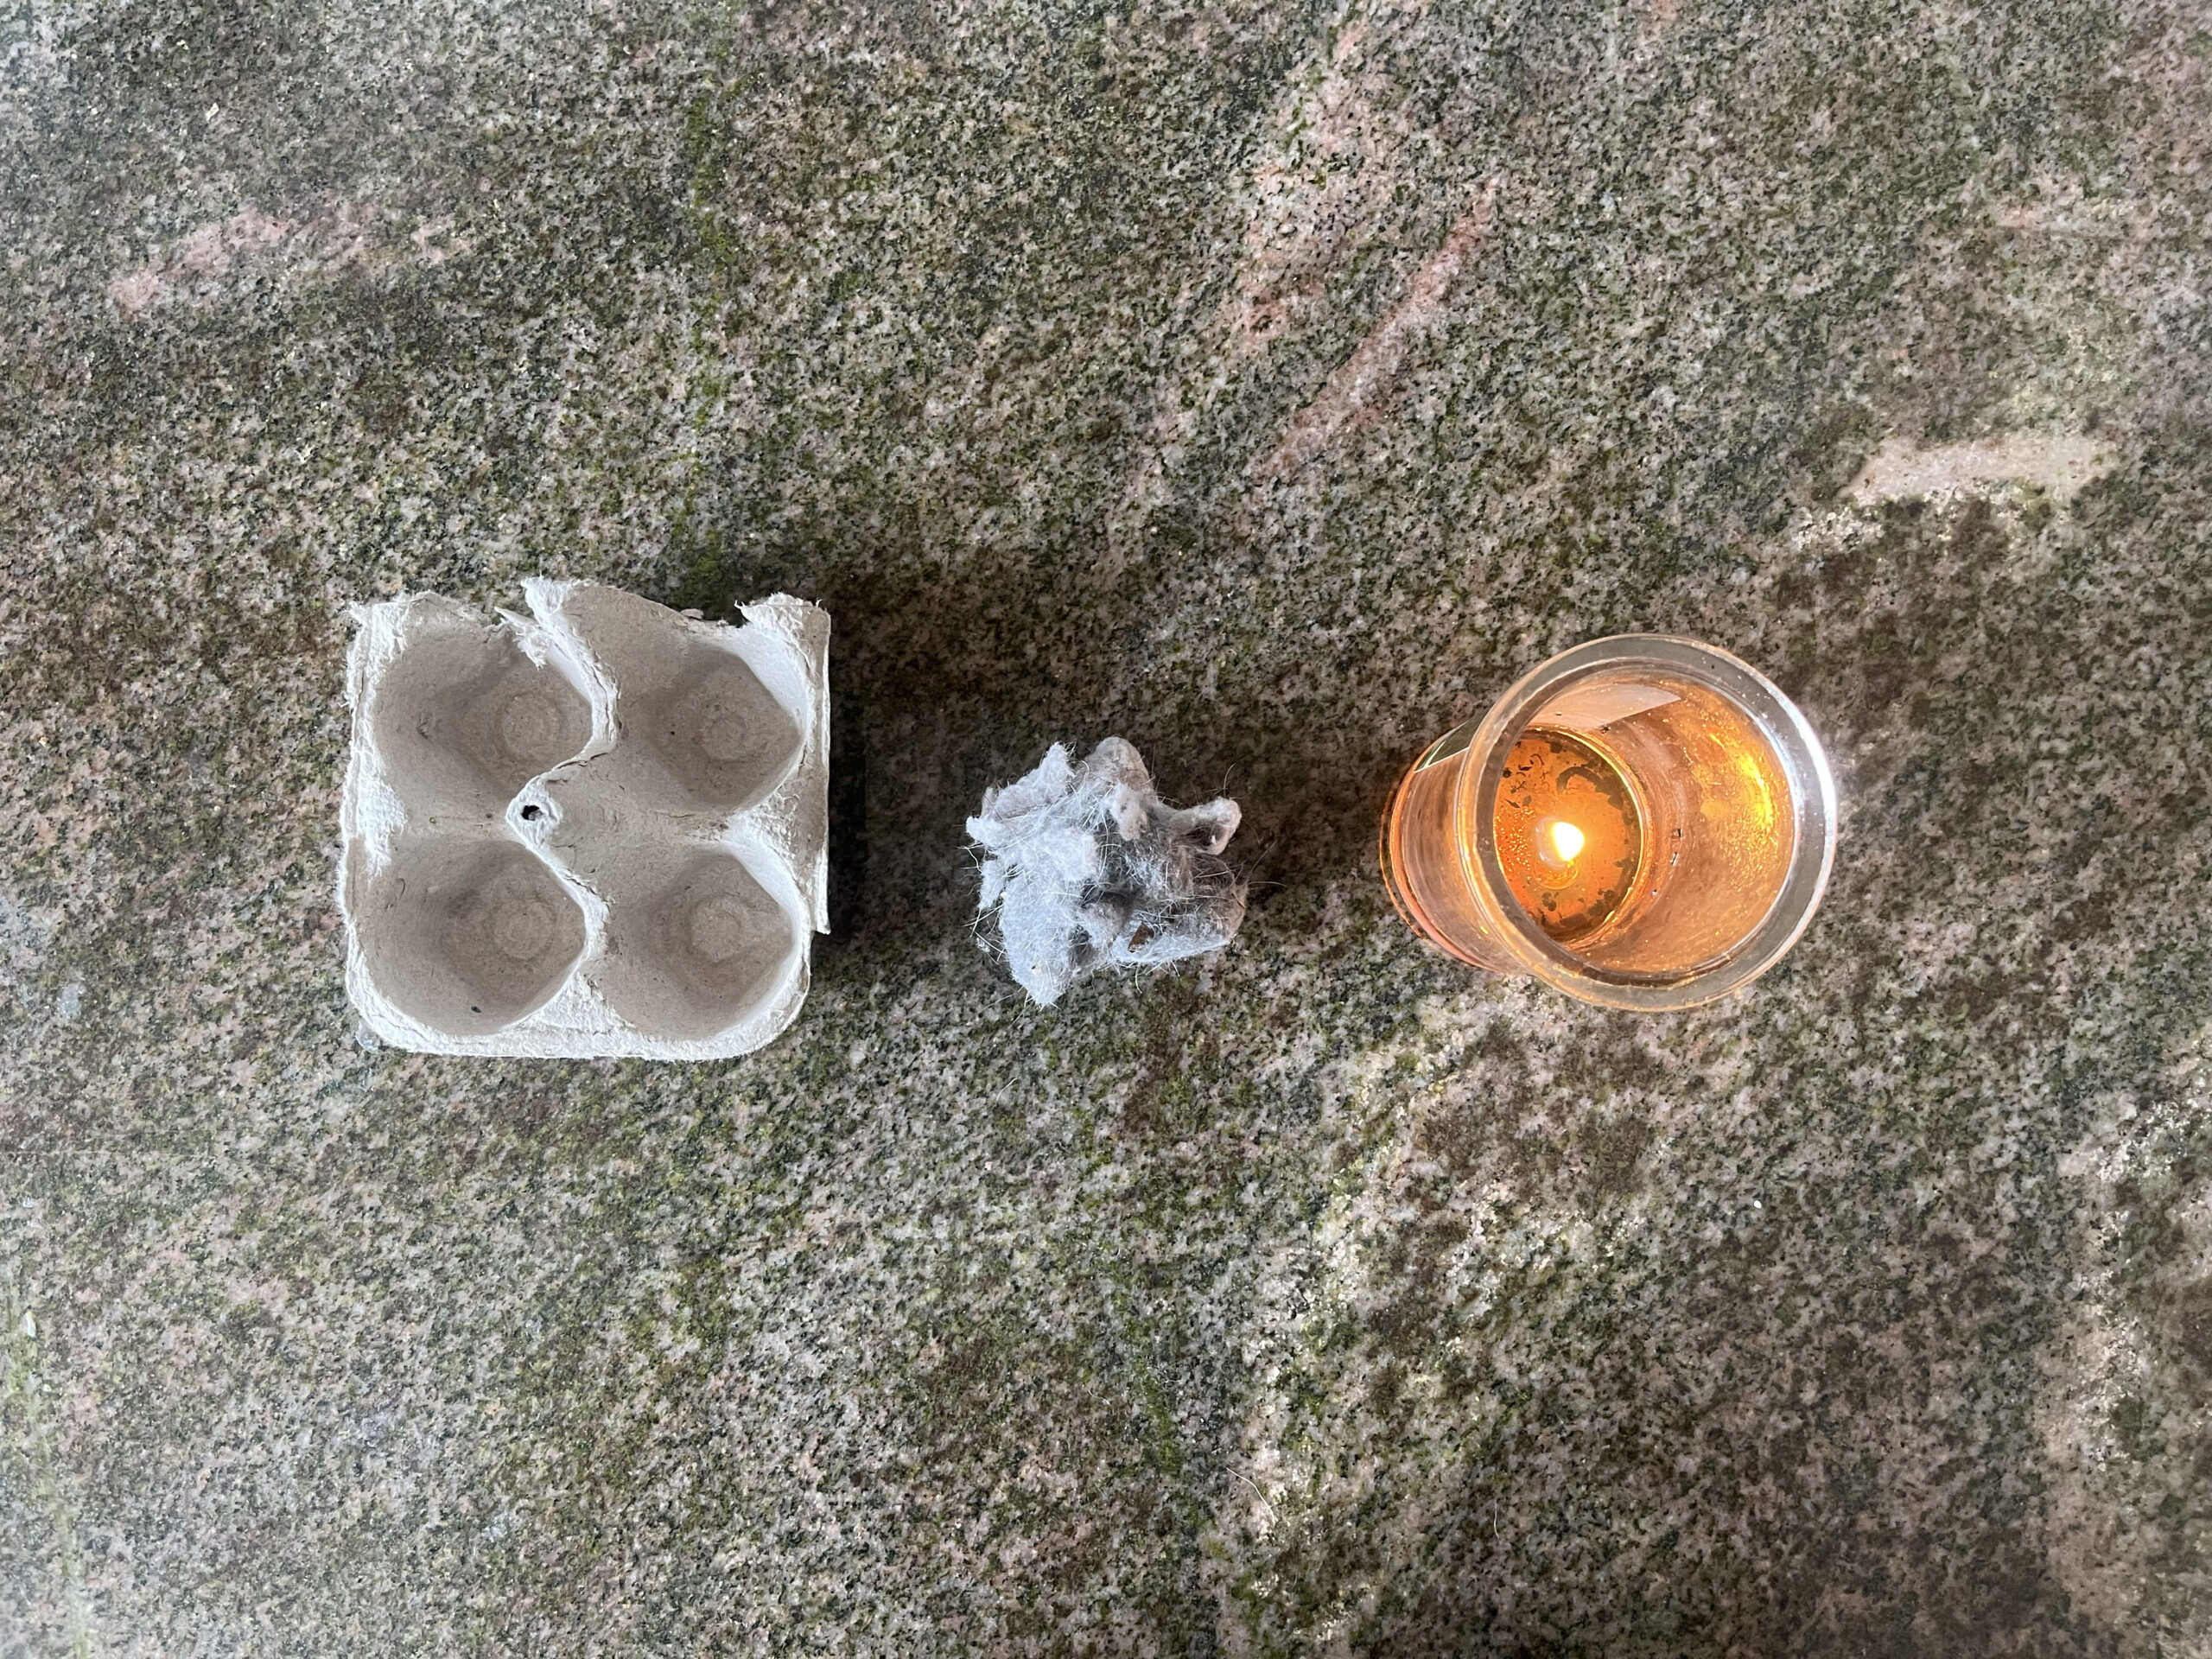 The DIY fire starter supplies are an egg carton, lint, and leftover candle wax.